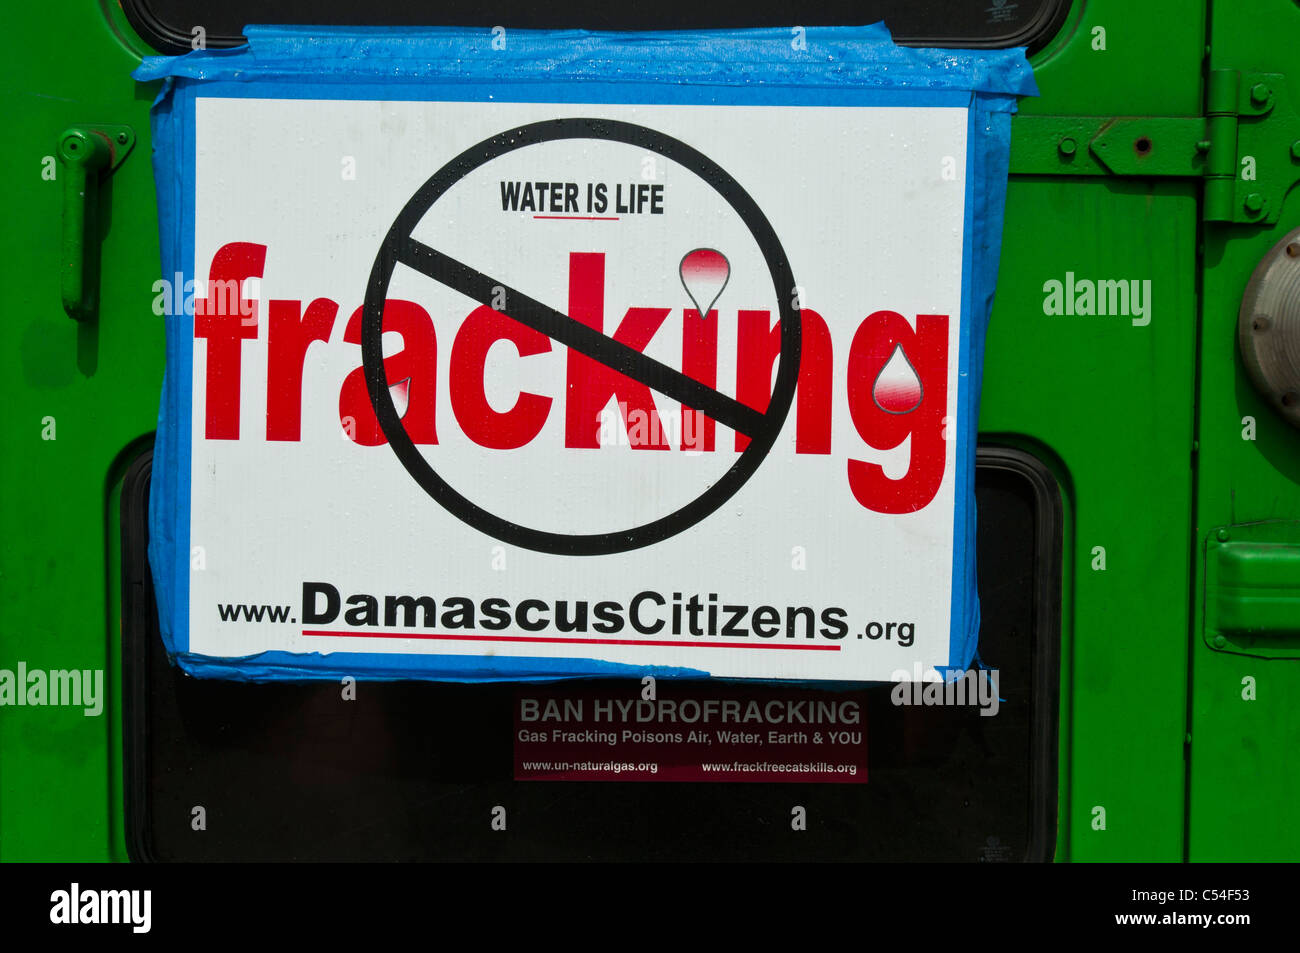 Water is life, anti fracking plate on green car, New York, USA Stock Photo